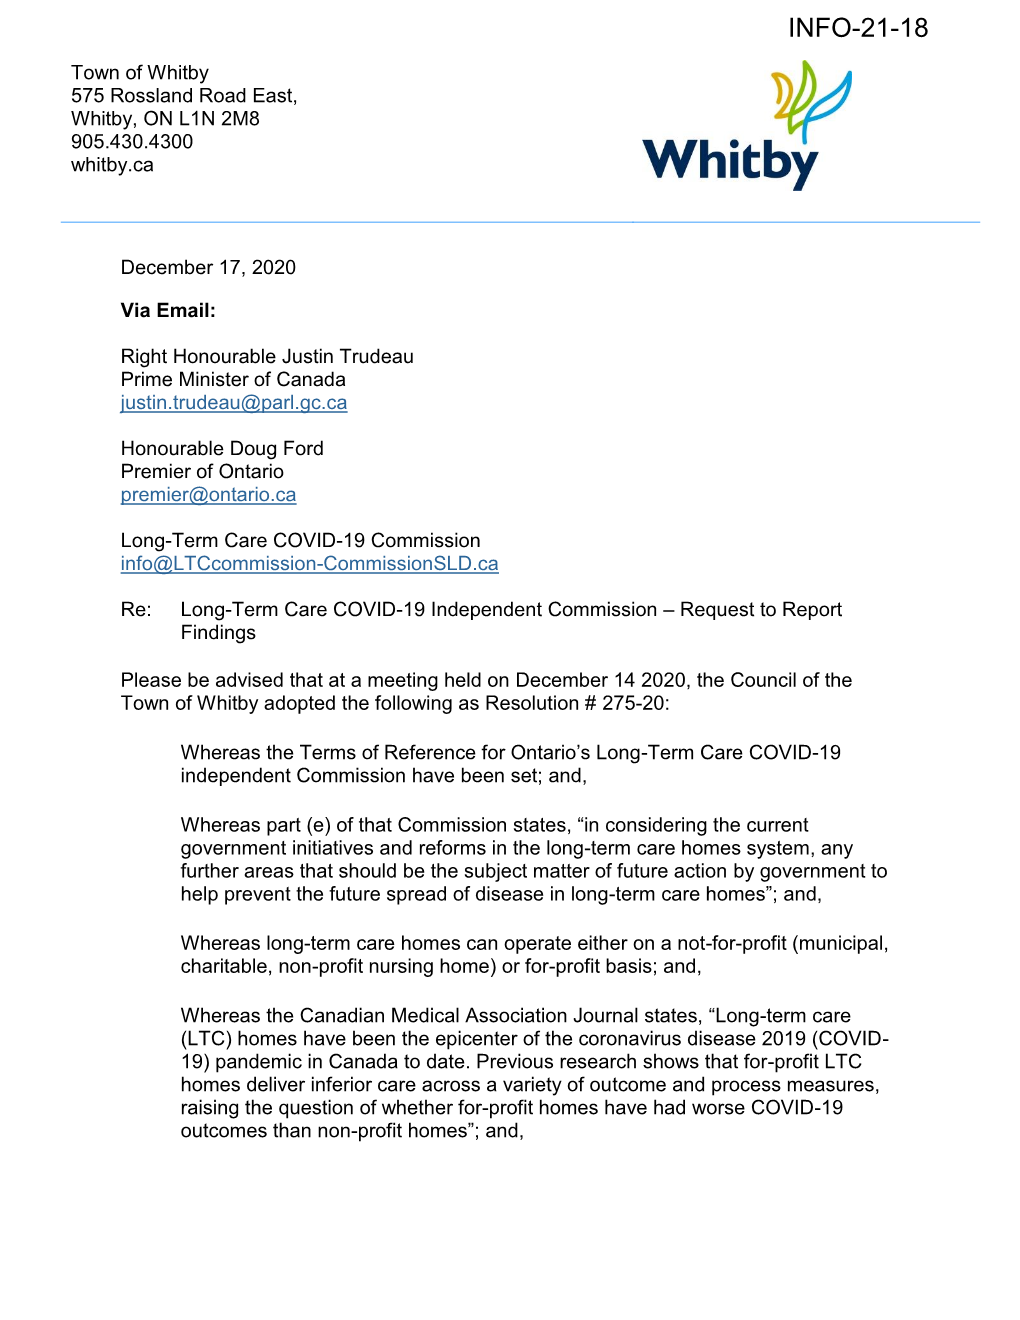 Town of Whitby Resolution Concerning Long Term Care COVID19